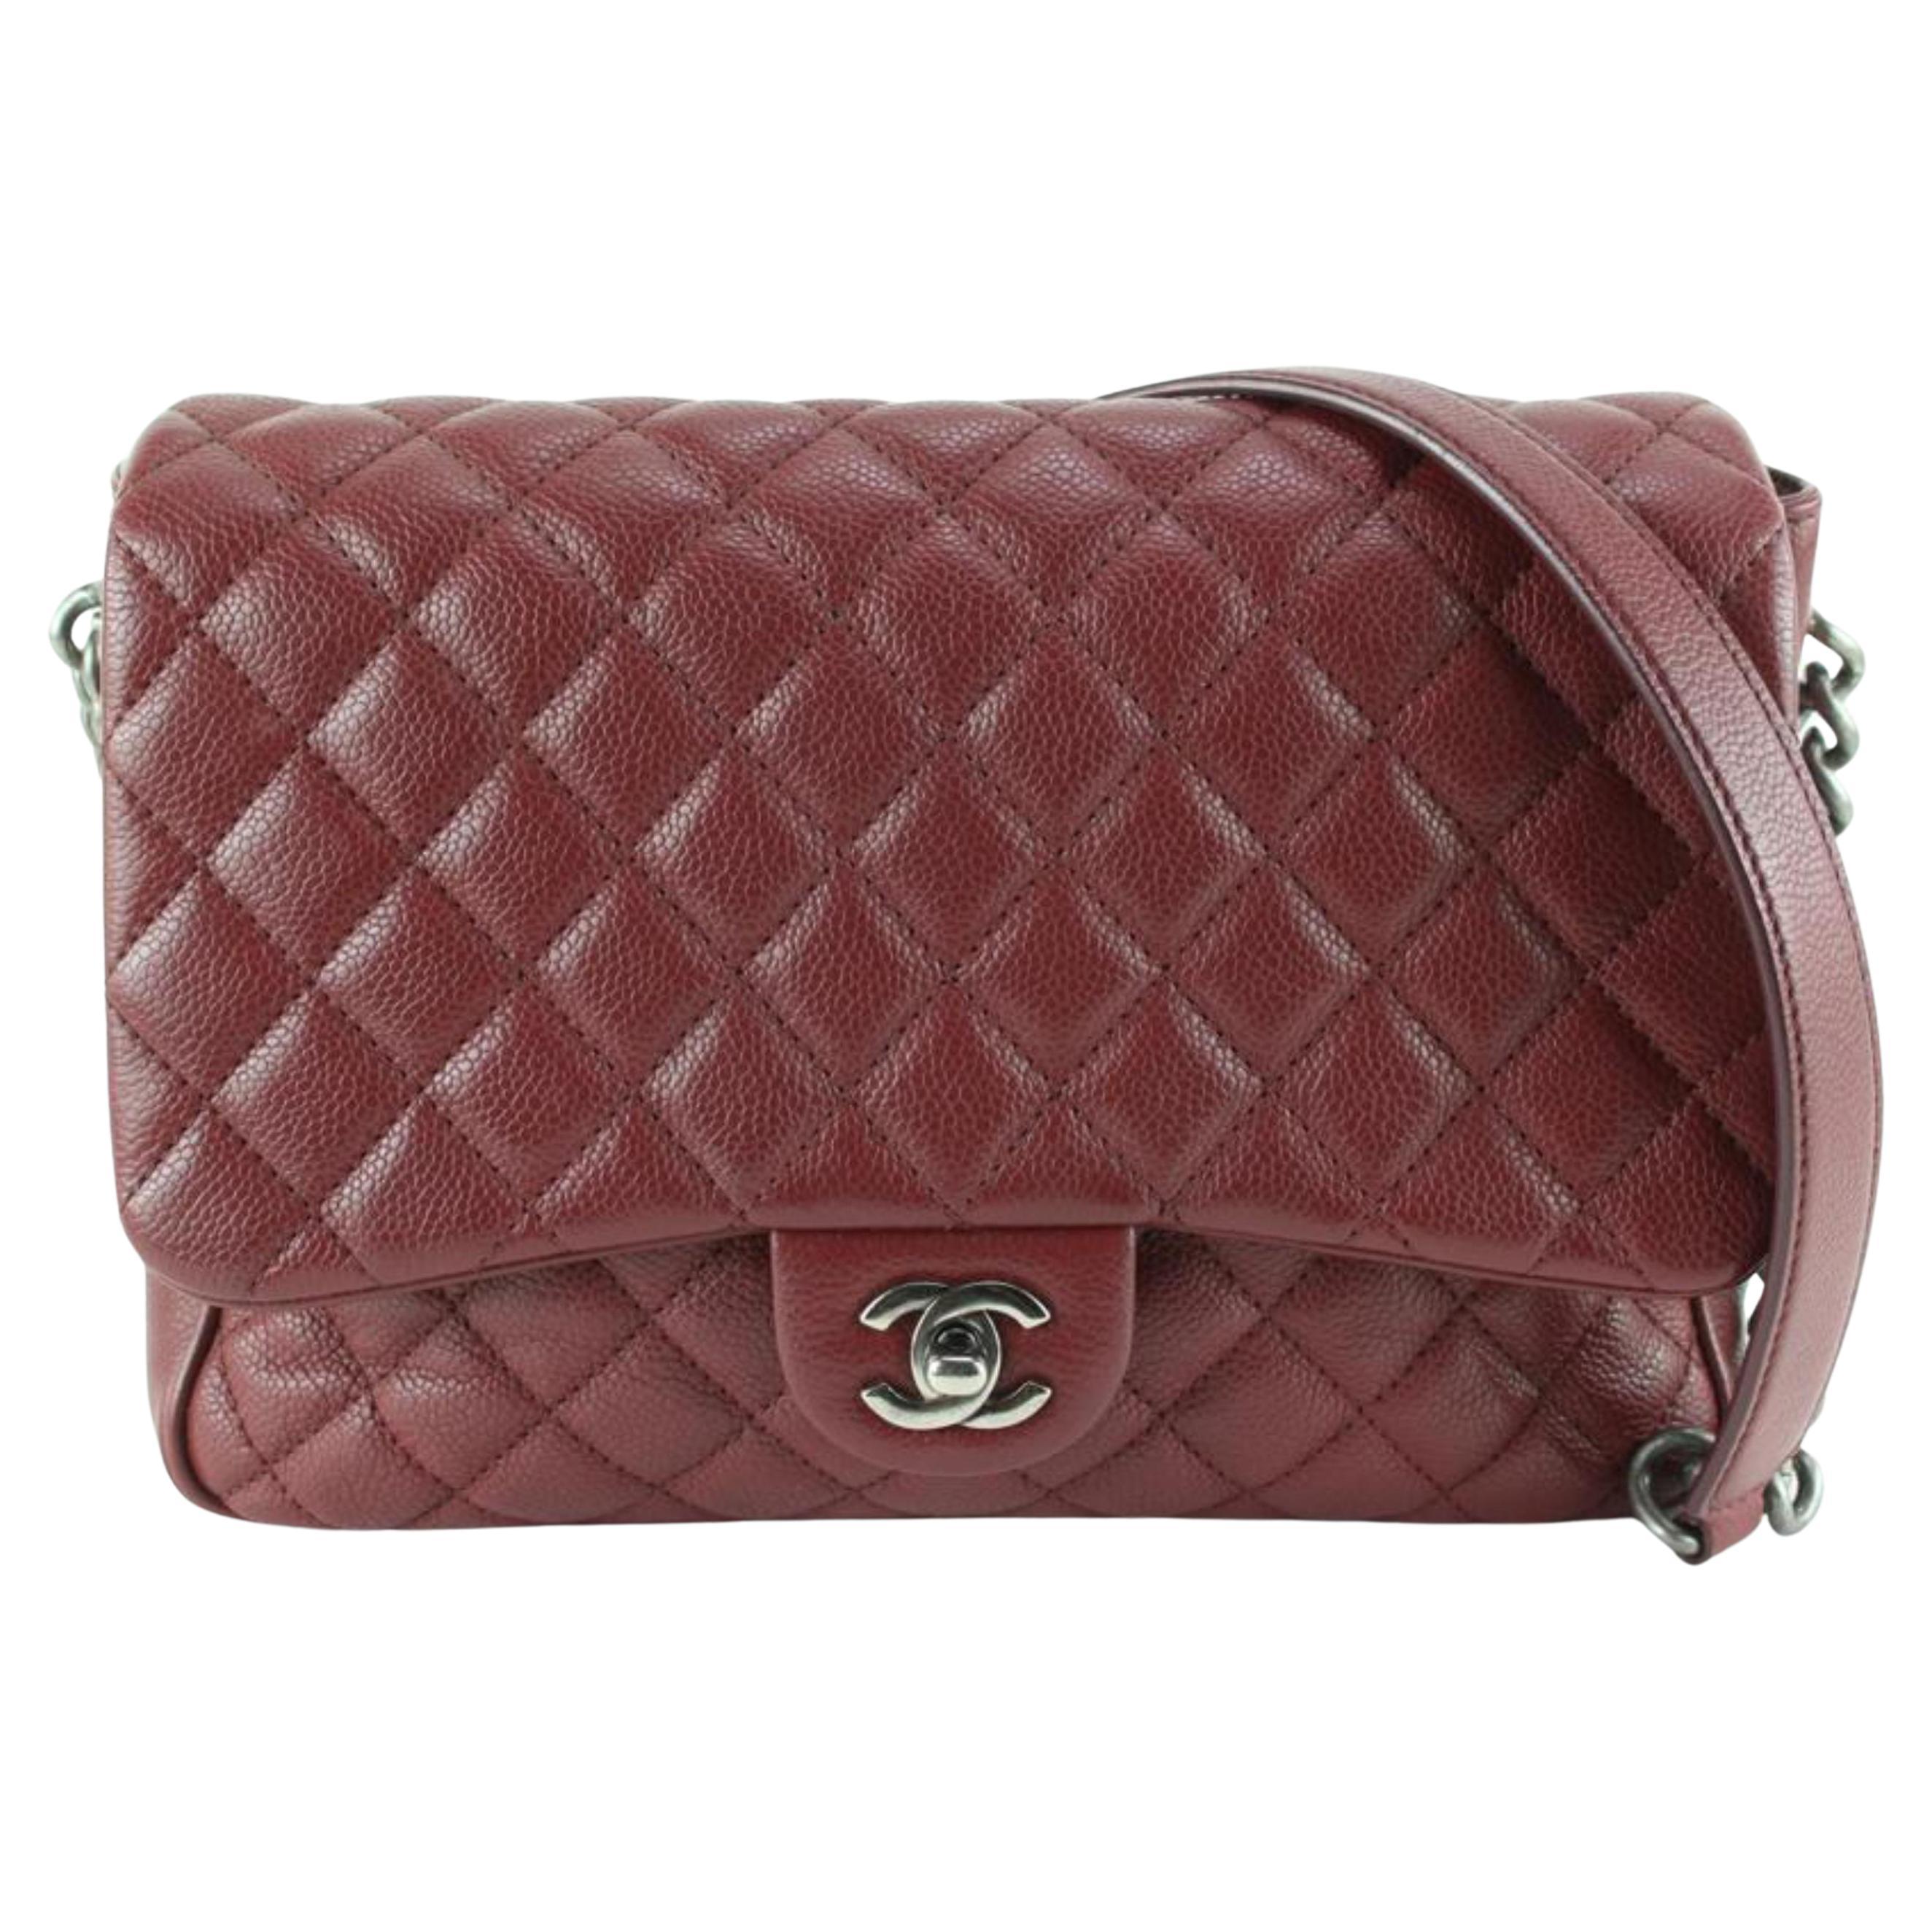 Chanel Dark Red Burgundy Quilted Caviar Leather Large Classic Flap 80cc825s